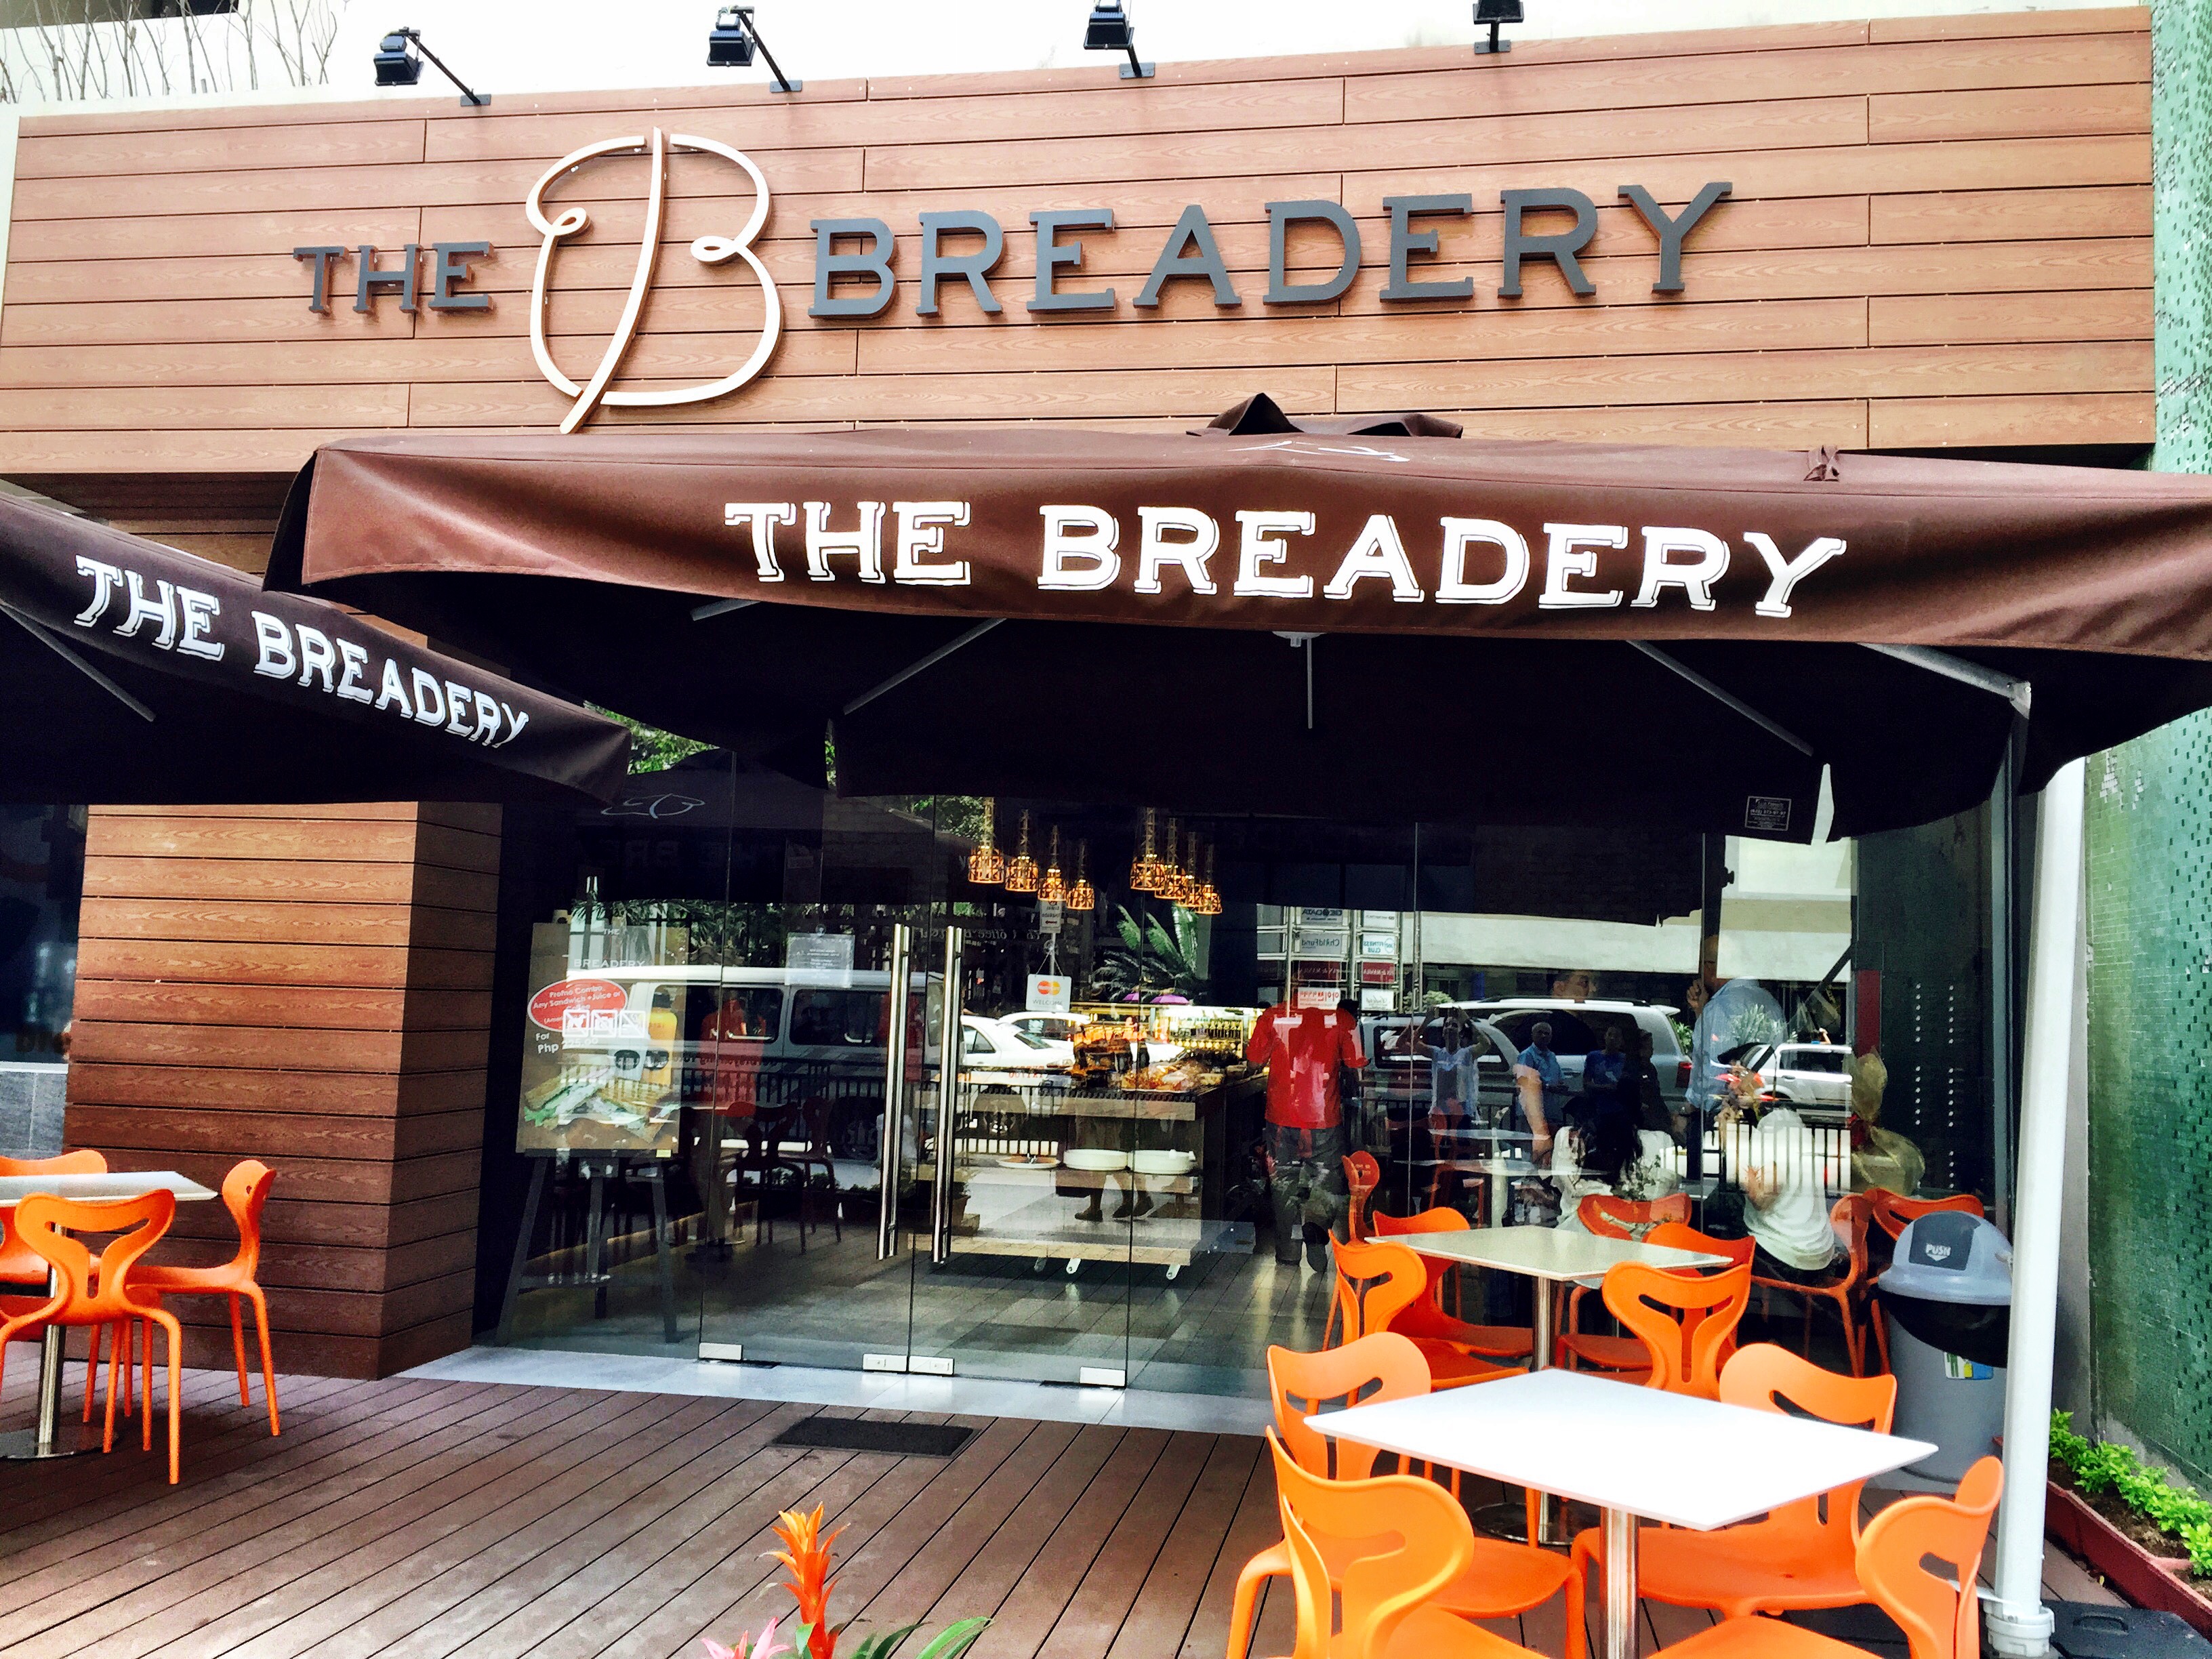 The Breadery: A New and Delectable Concept In Town